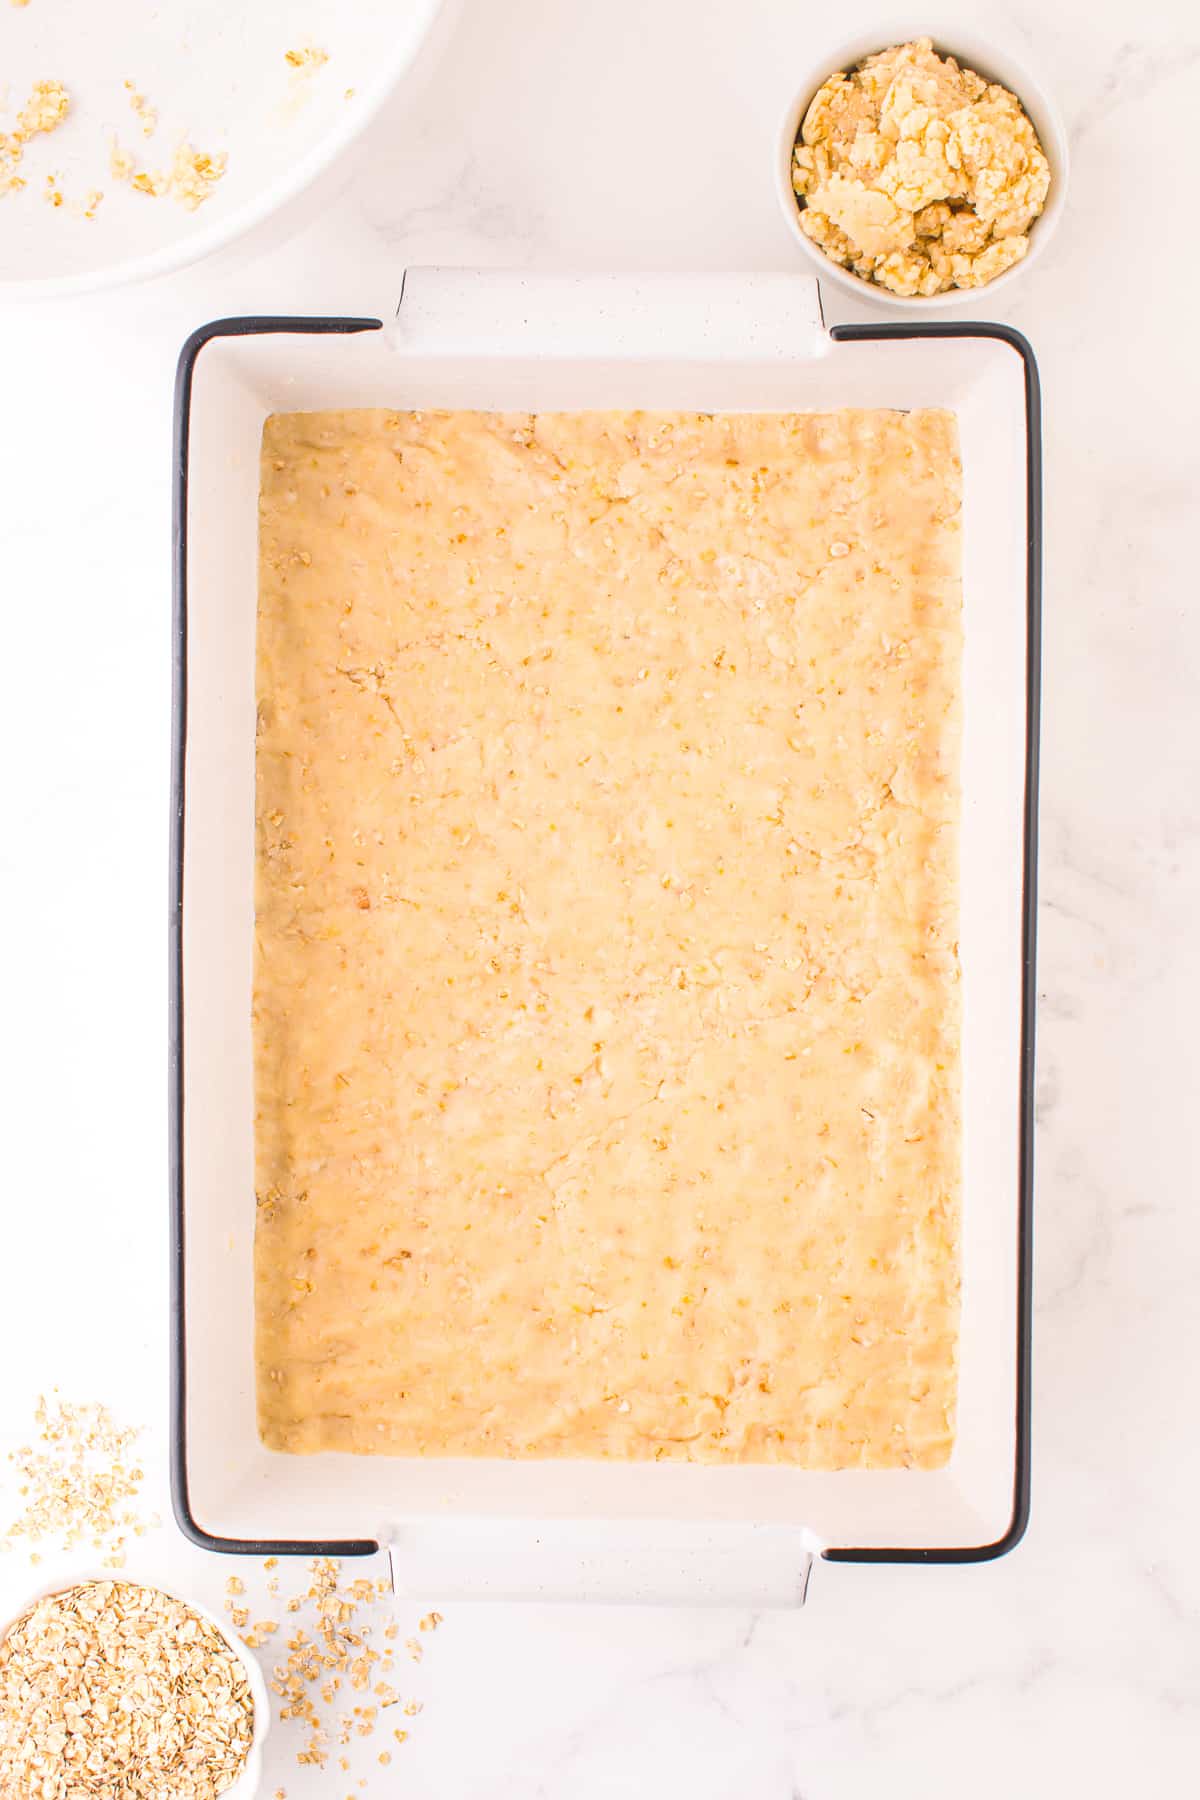 A buttery dough is pressed into the bottom of a large rectangular pan from overhead with more dough in a small bowl on the counter nearby.